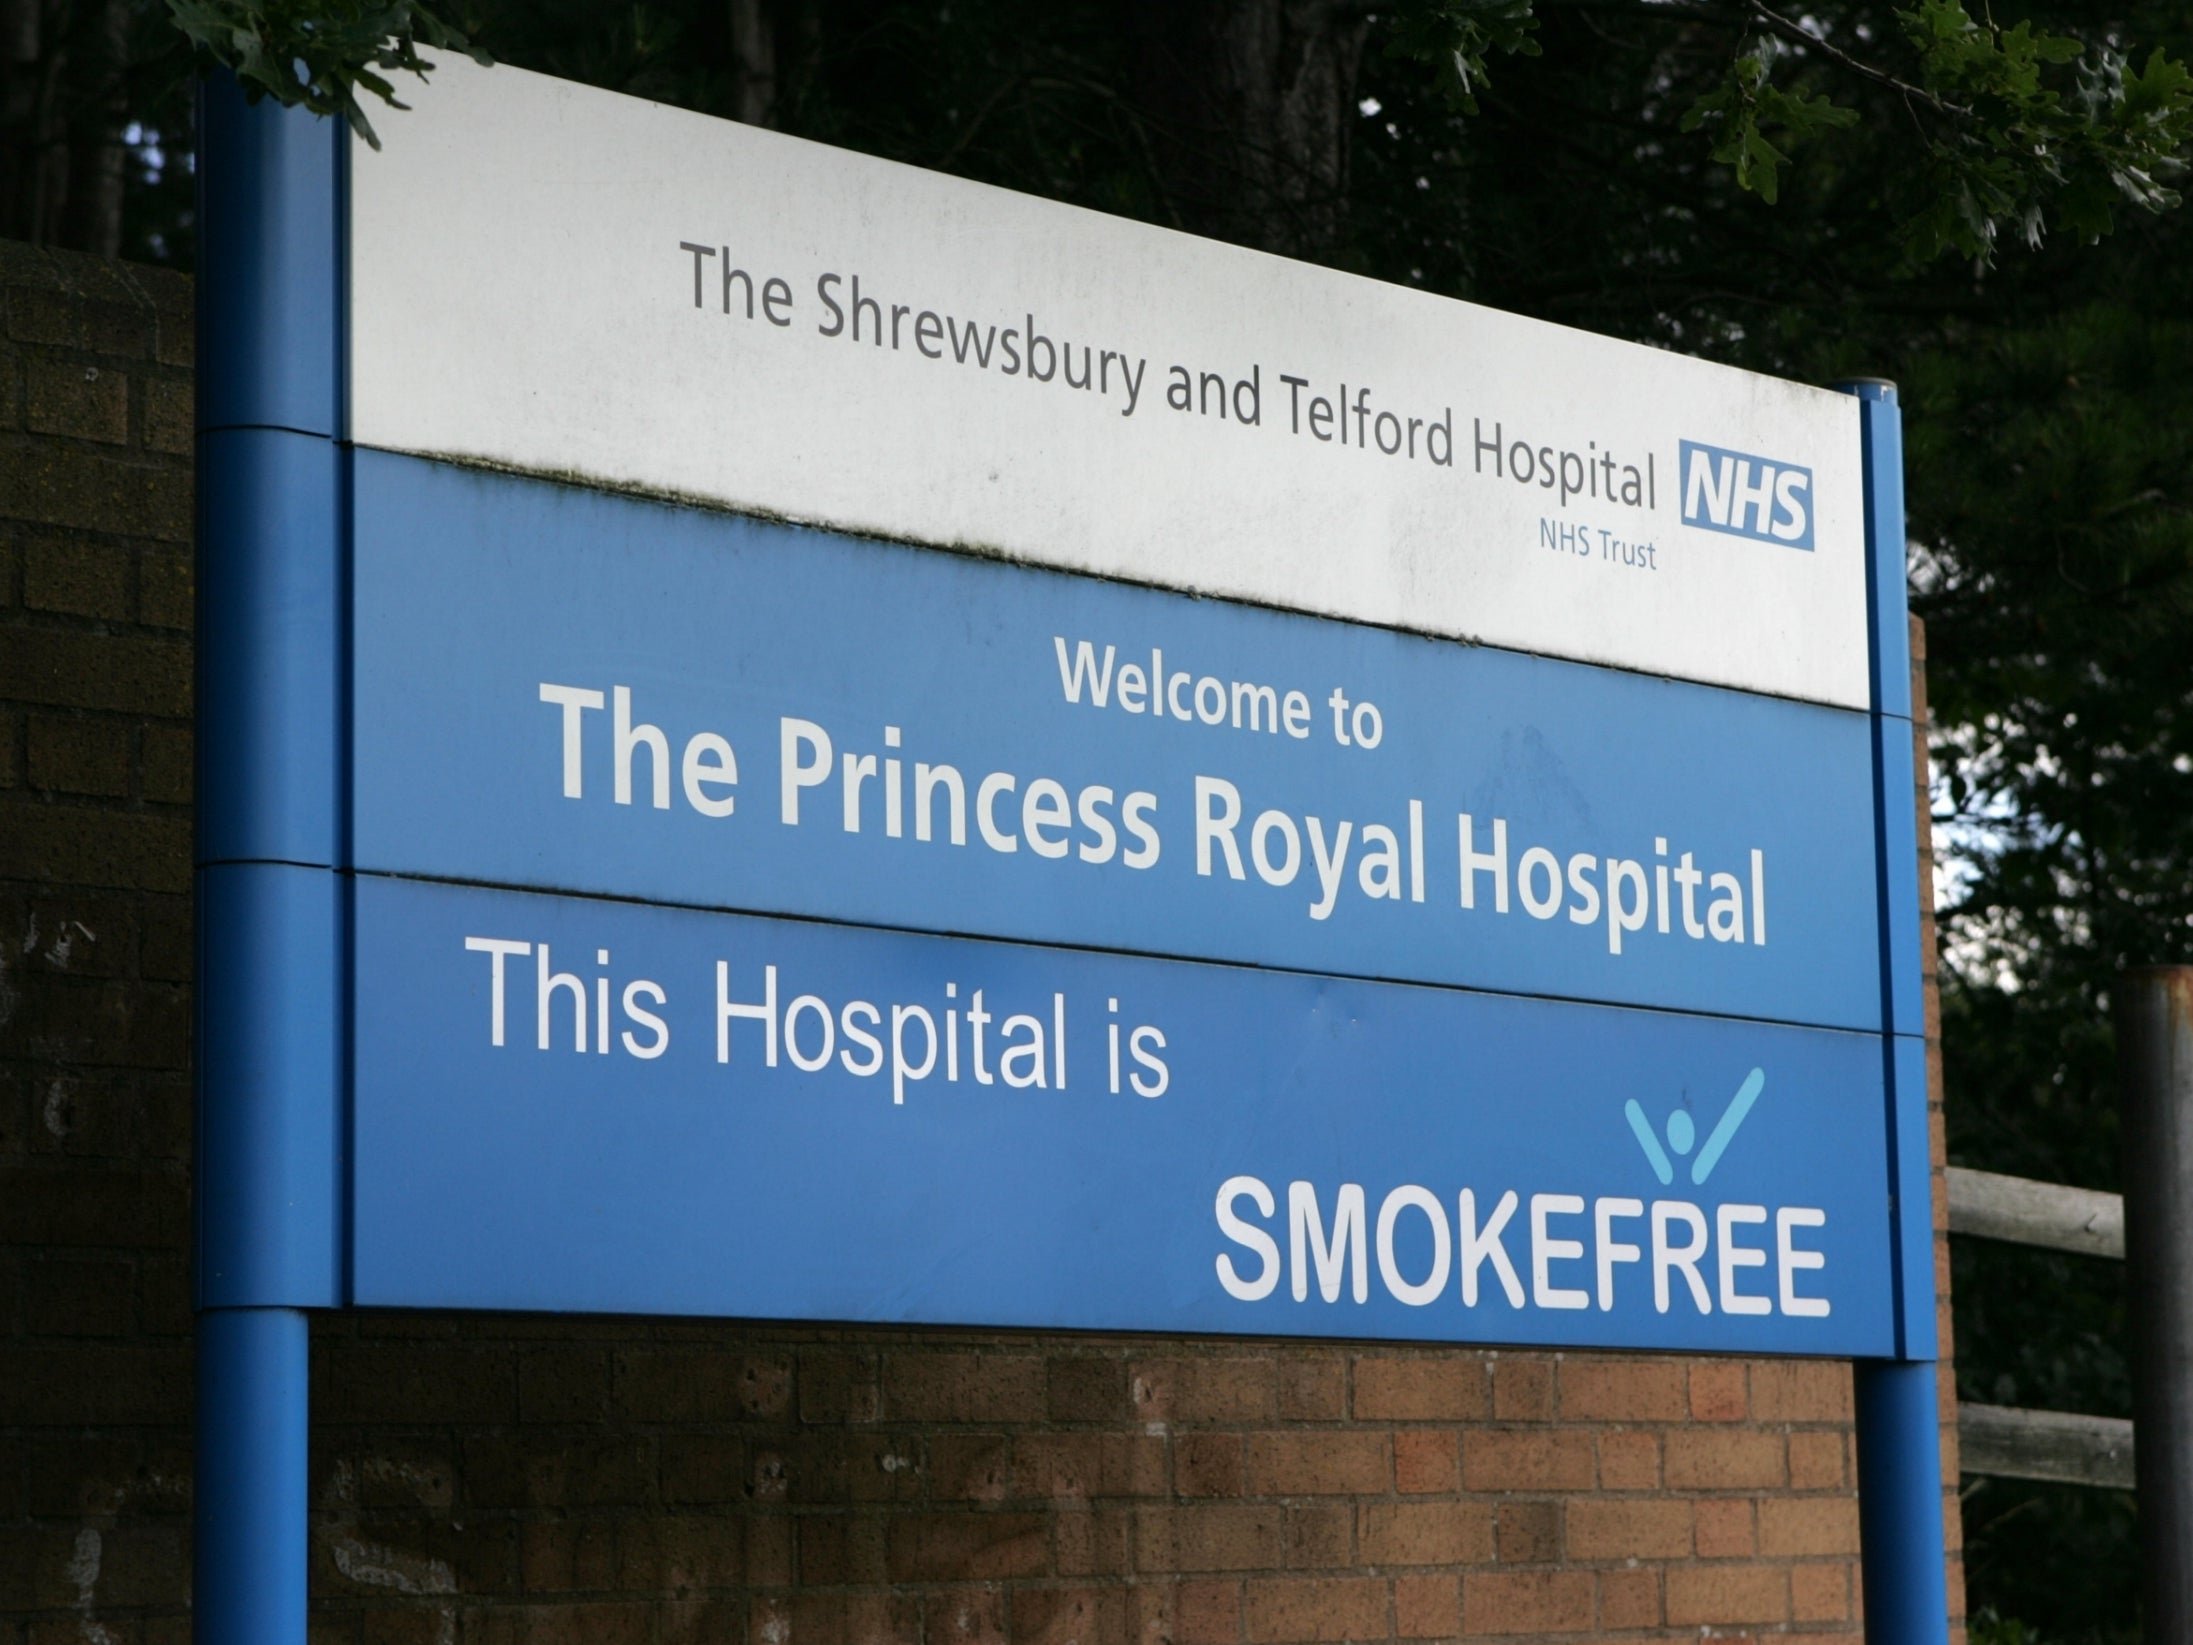 The number of cases of alleged poor care at Shrewsbury and Telford Hospitals Trust now stands at more than 700